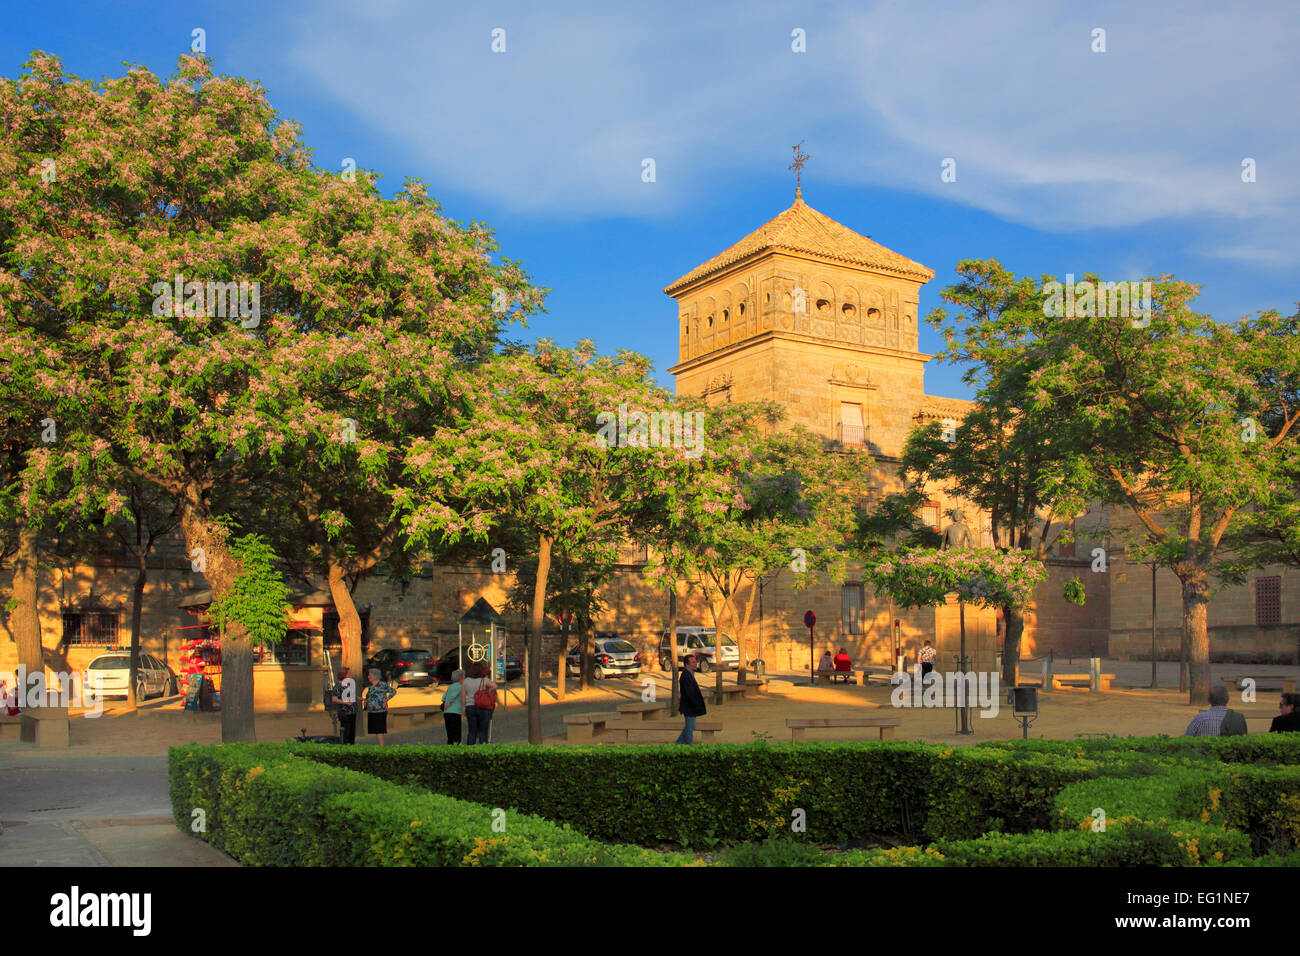 City park, Ubeda, Andalusia, Spain Stock Photo